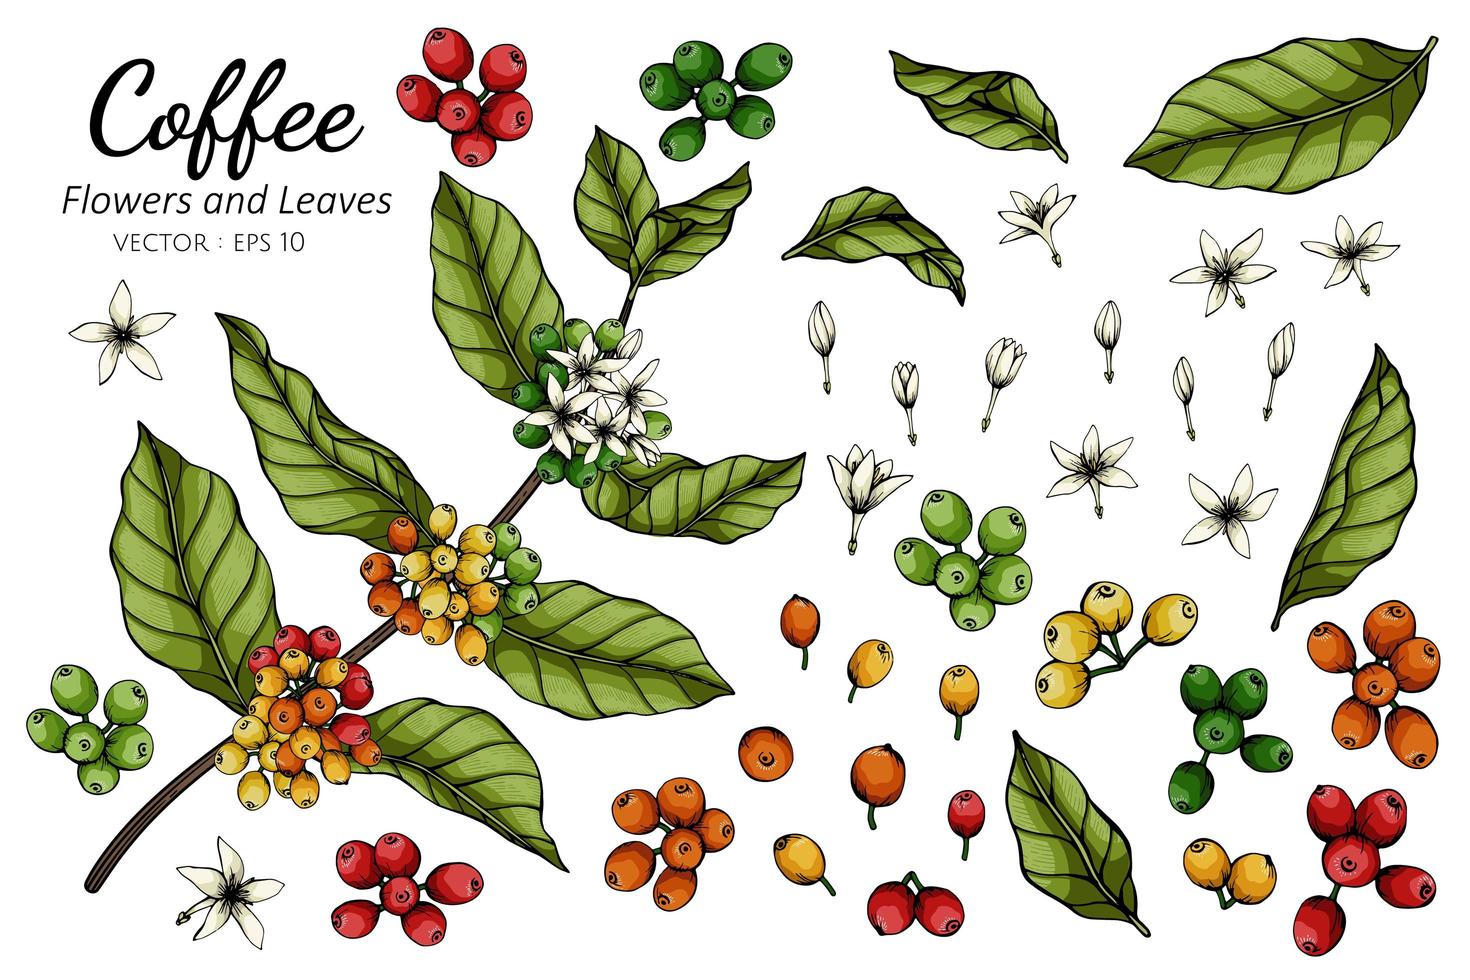 Coffee Flowers and Leaves Drawing vector